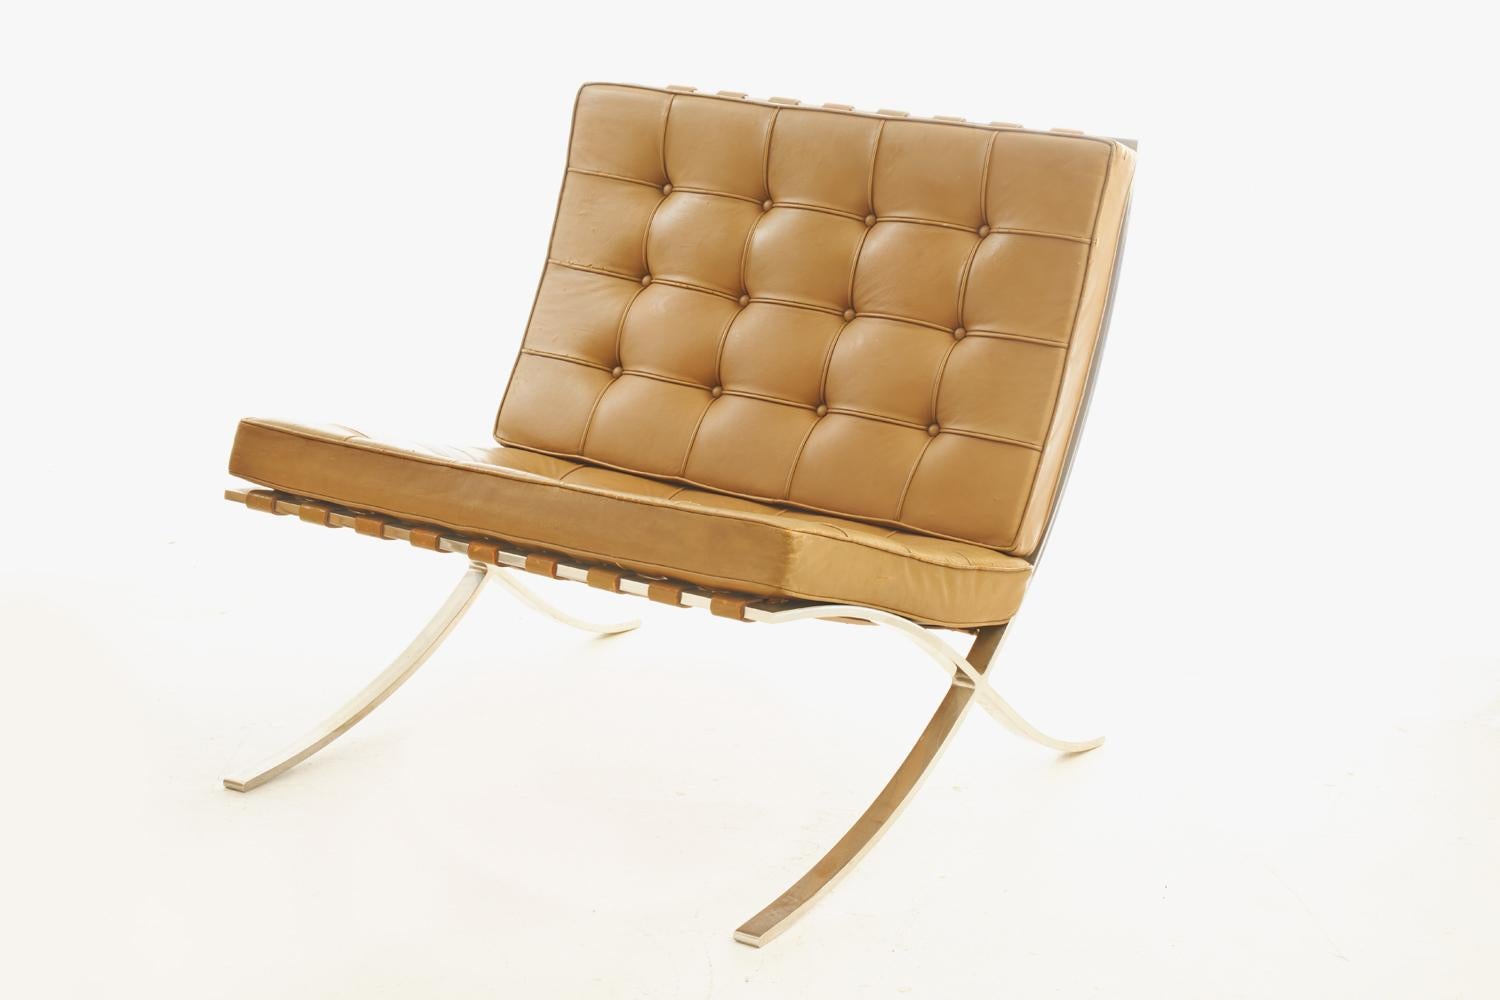 Bauhaus Pair of Knoll Barcelona Chairs Tan Leather 1960s Mies van der Rohe